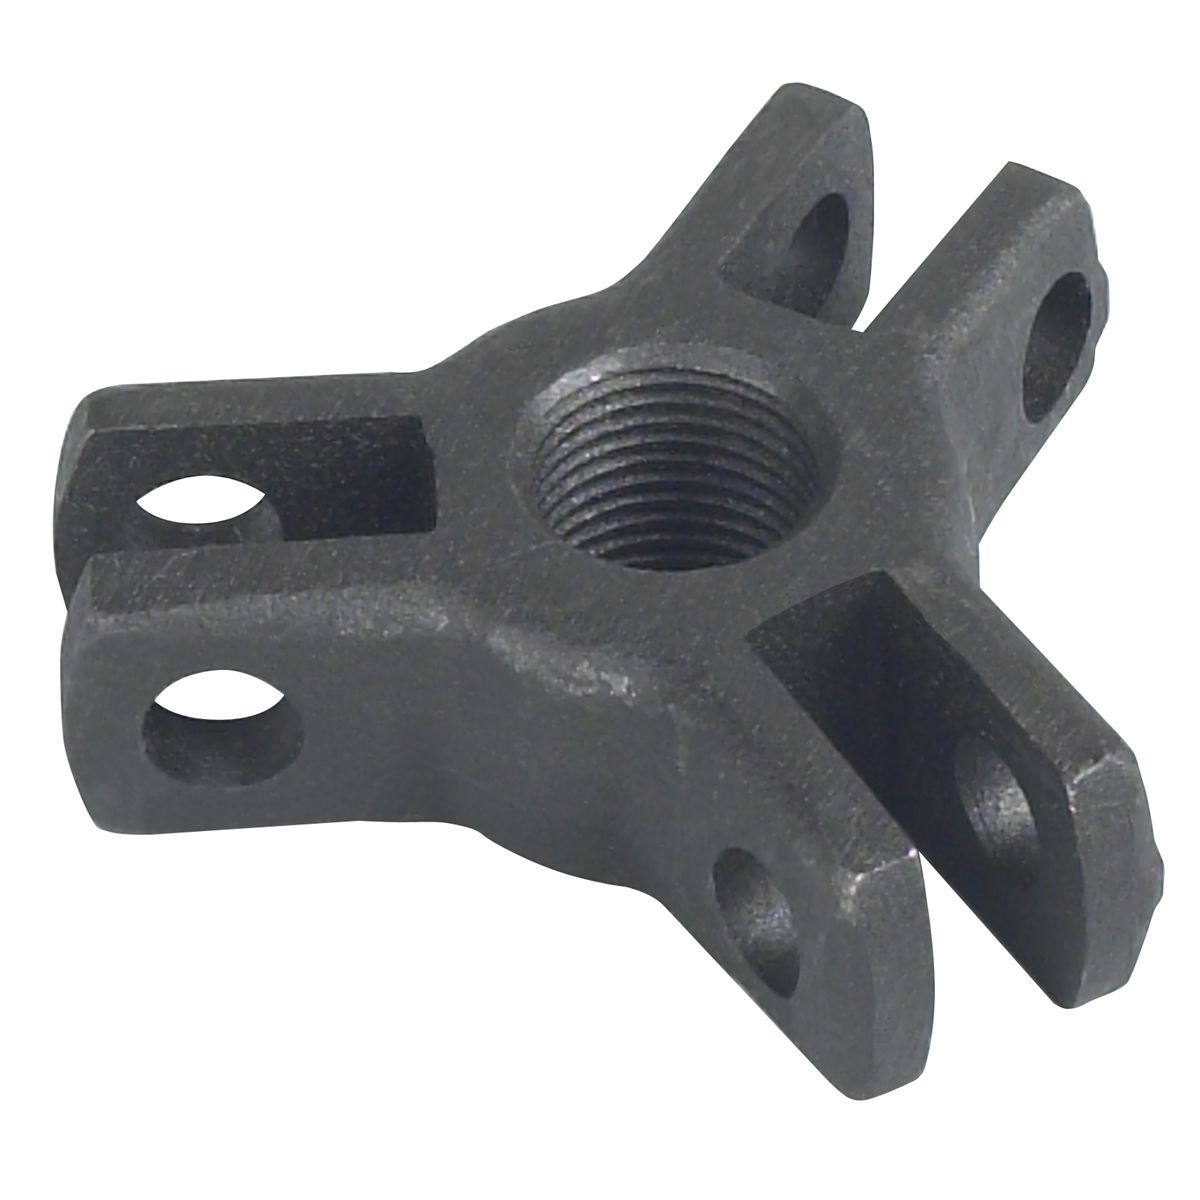 Three-Way Puller Head for OTC 1179 and 7948